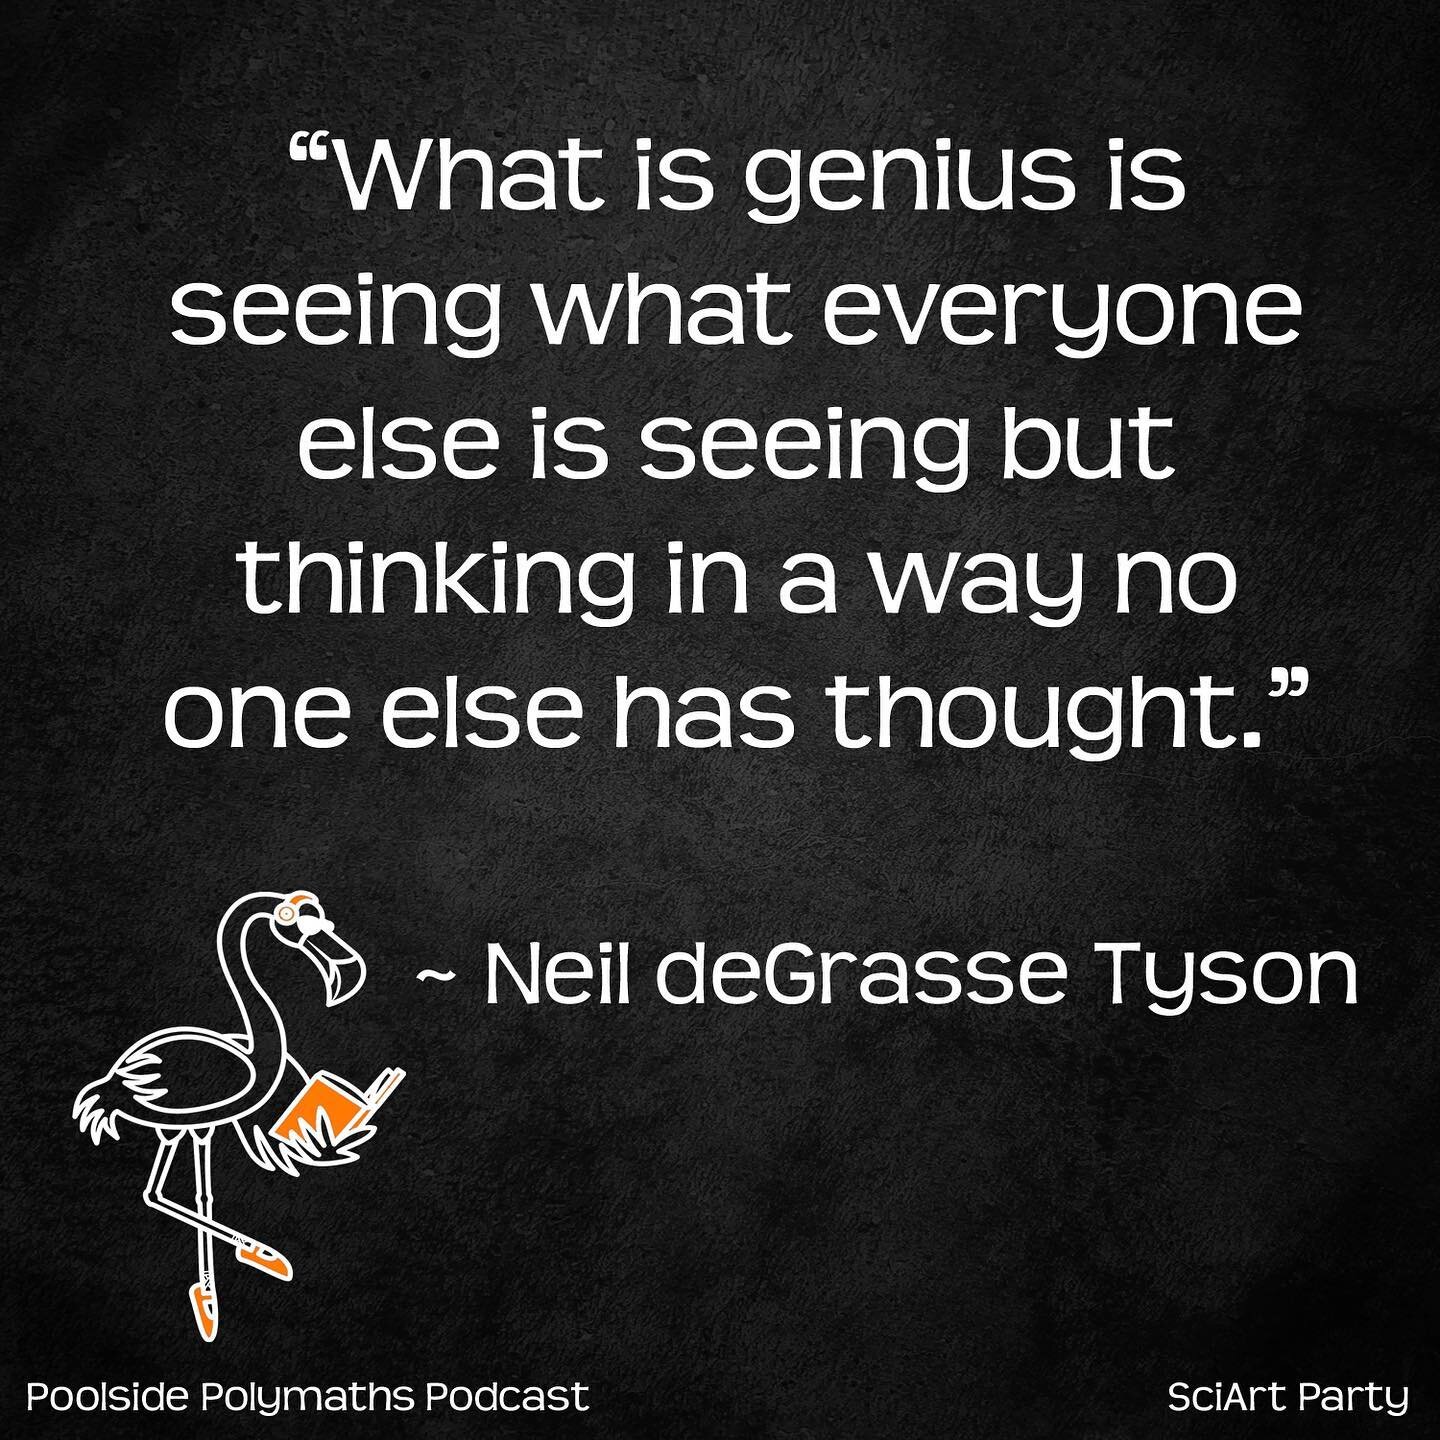 More Neil deGrasse Tyson wisdom in 2nd part of Episode II released yesterday! Be sure to have a listen (link in my bio) and we&rsquo;re super grateful if you share w your friends 🤗💫!

PART TWO IS OUT!!! 😎 Follow along as we continue our conversati